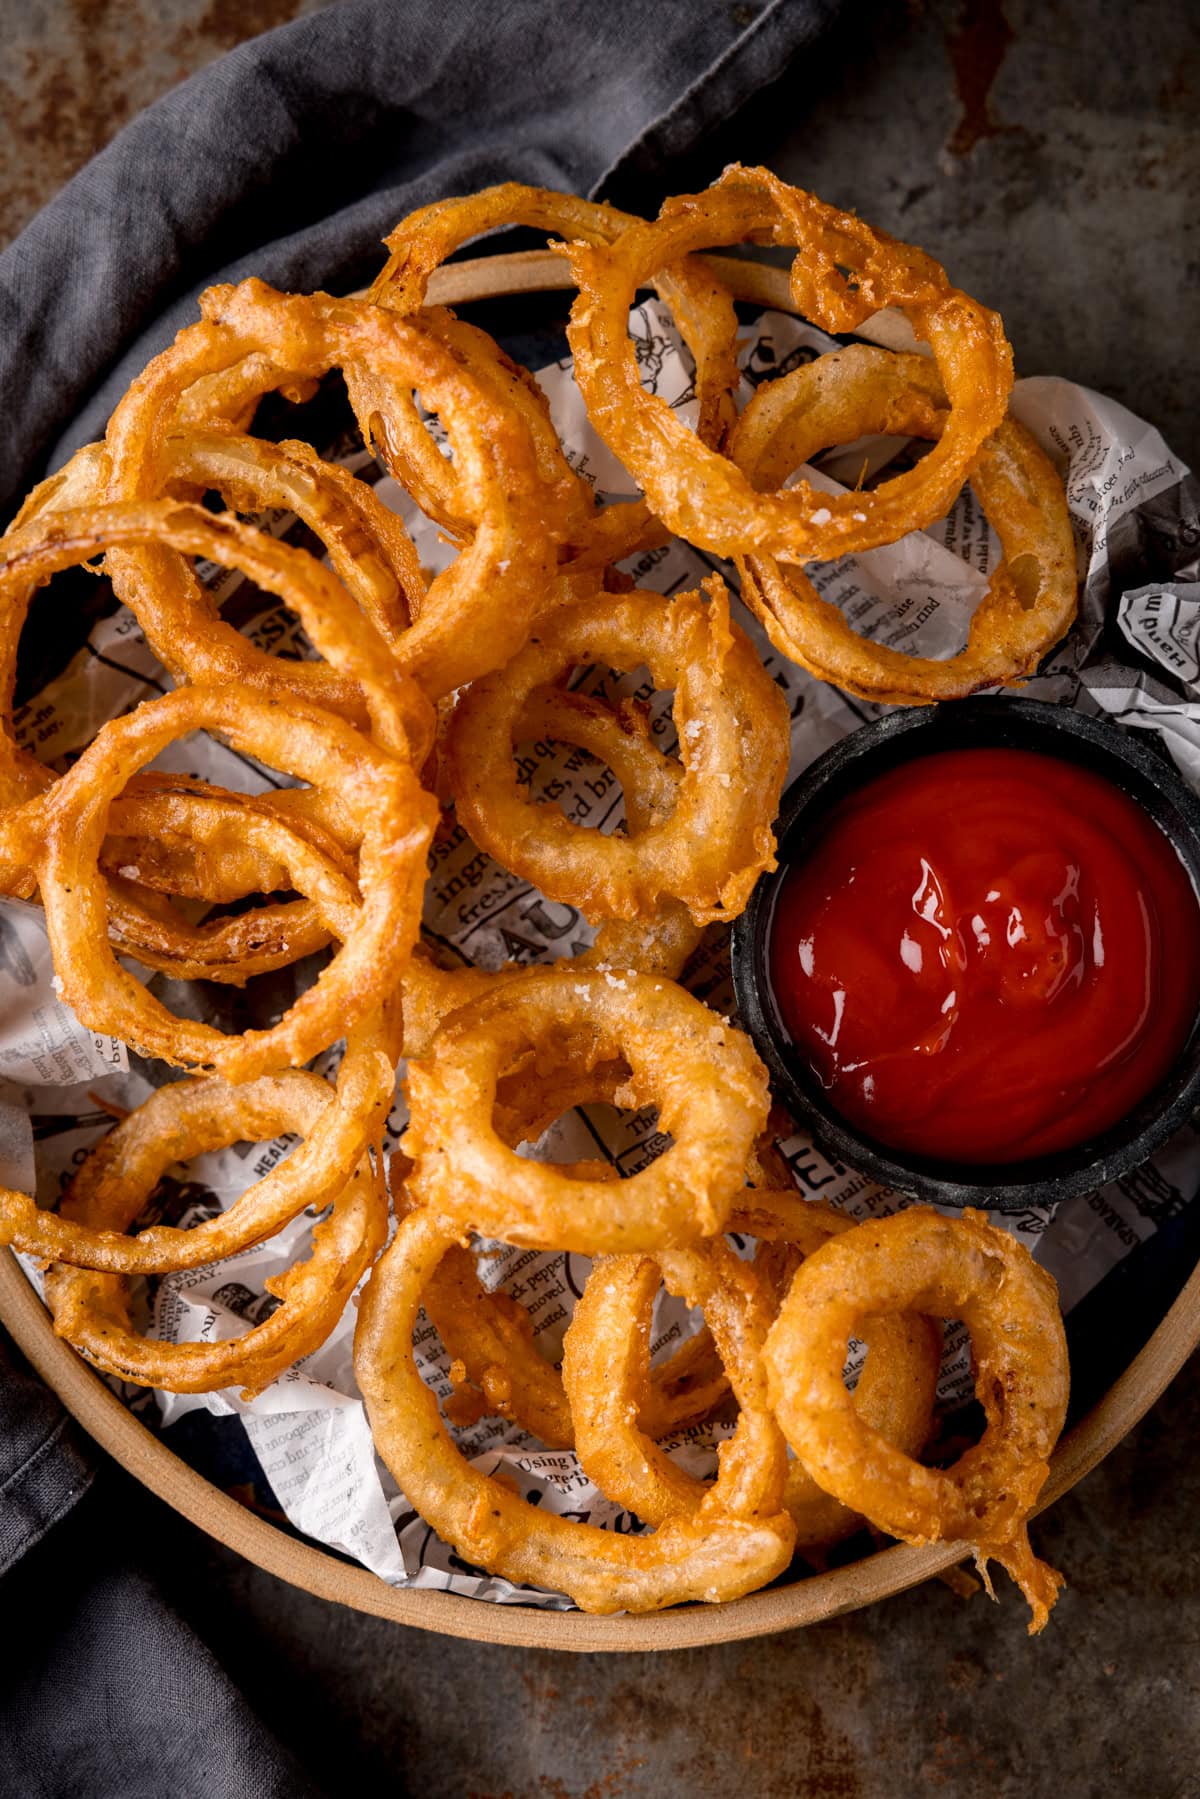 A tall, overhead image of Fried Onion Rings. The onion rings are set on a brown plate, lined with black and white newspaper. To the right of the image, on the right side of the plate with the onion rings, there is a black dish filled with tomato ketchup. You can see to the left of the main plate, that a slate grey napkin is tucked around the plate. This is all set on a dark grey, metal background.